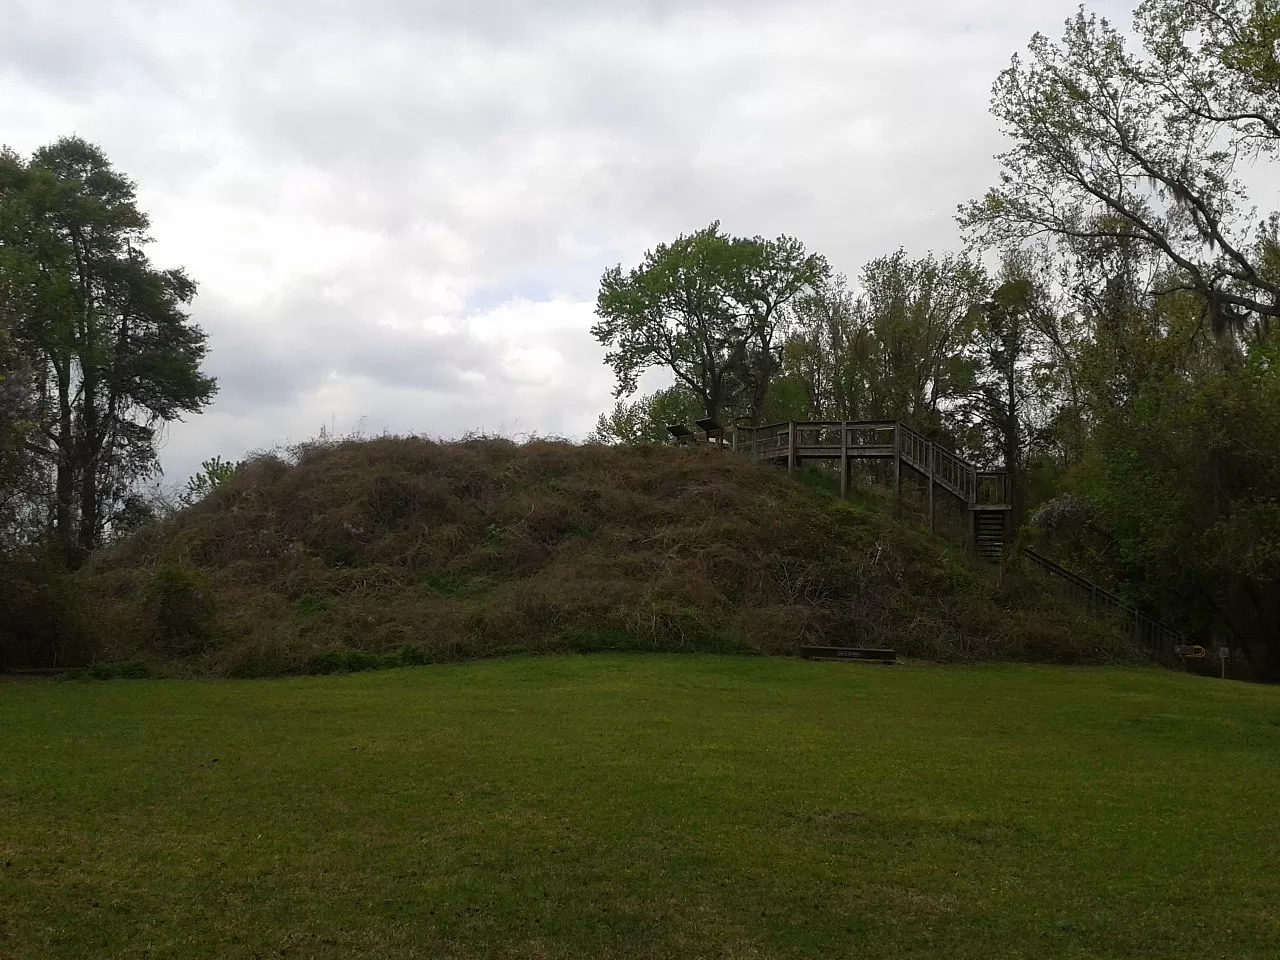 Santee Indian Burial Mound located on Lake Marion